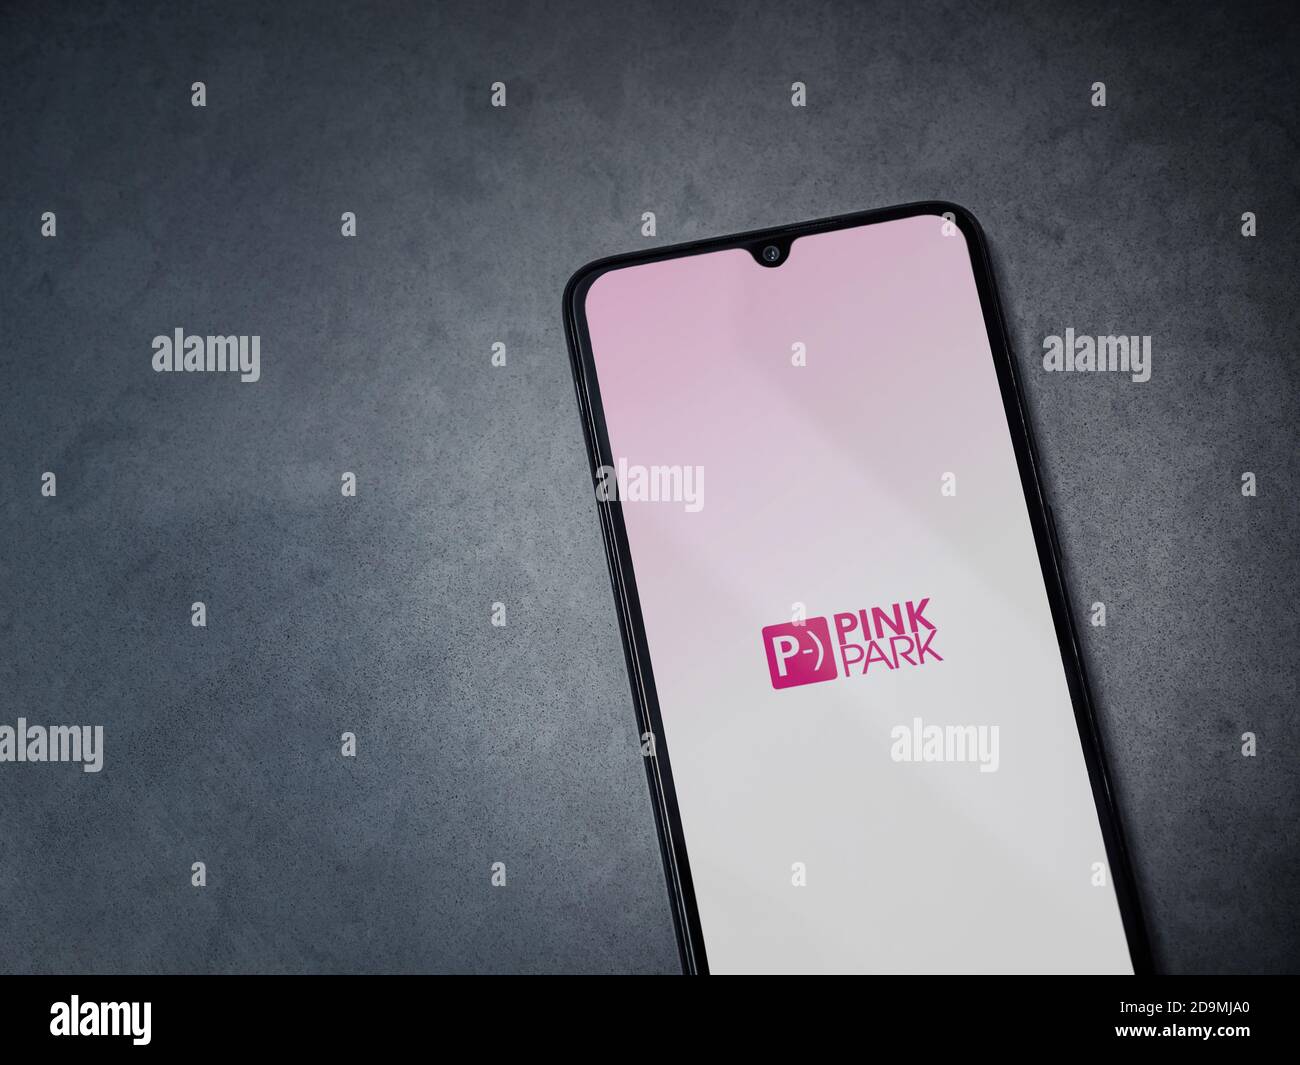 Lod, Israel - July 8, 2020: Pink Park app launch screen with logo on the display of a black mobile smartphone on dark marble stone background. Top vie Stock Photo